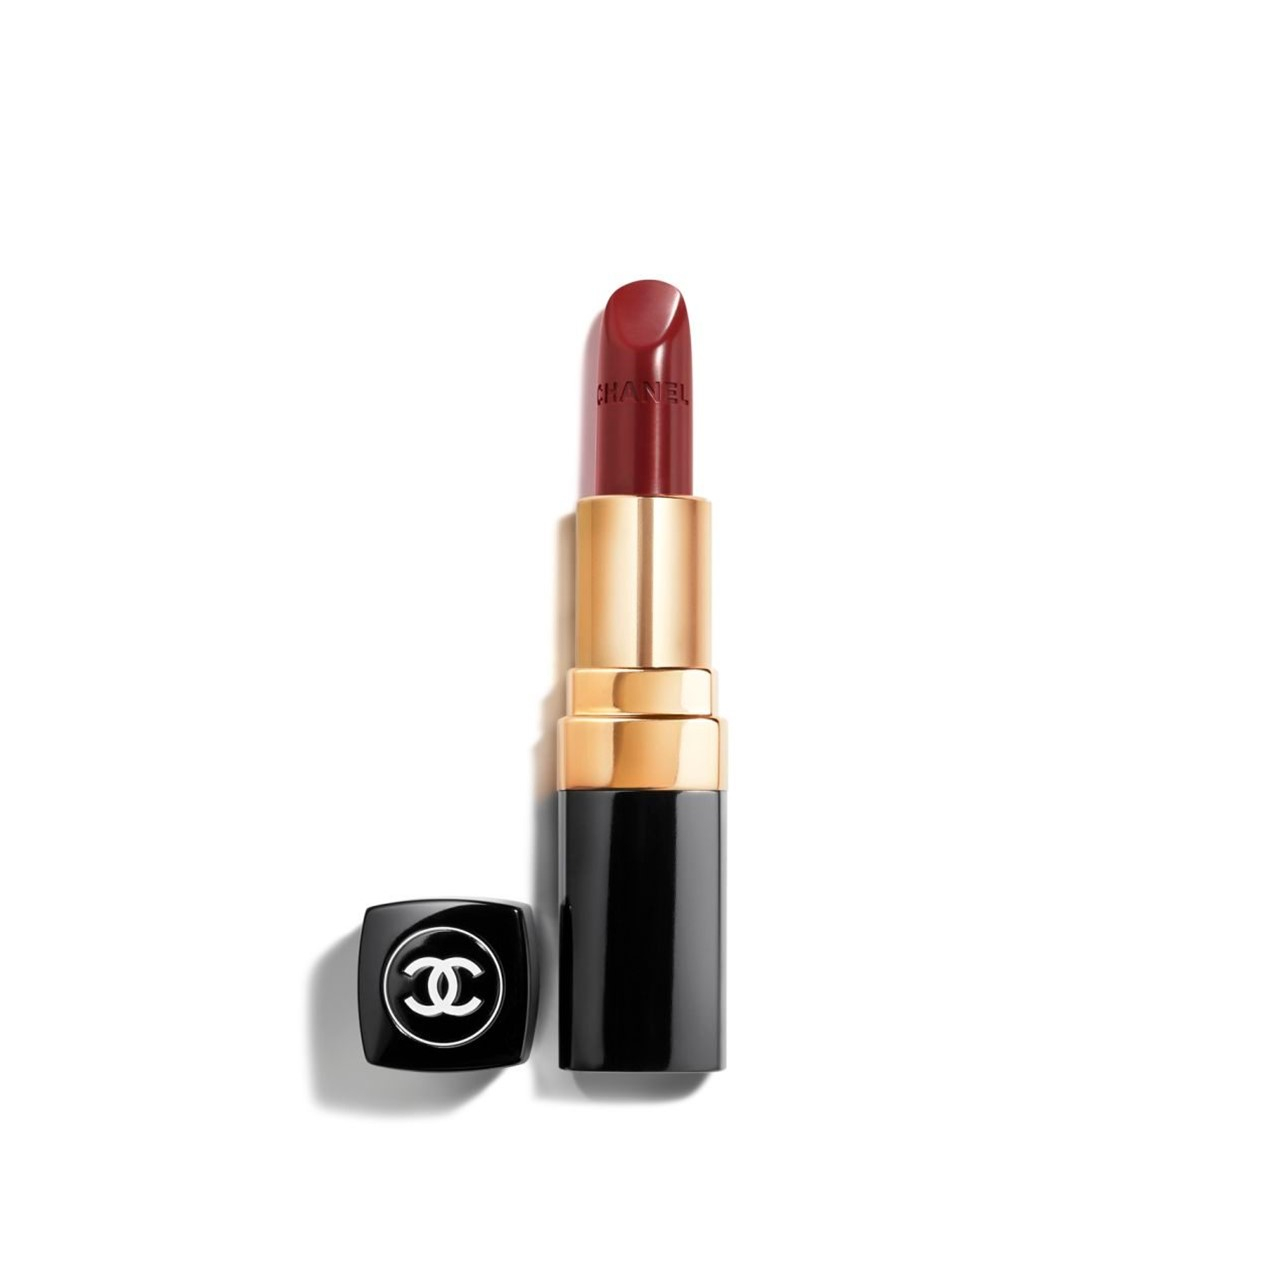 Chanel Chanel Rouge Coco 470 Marthe